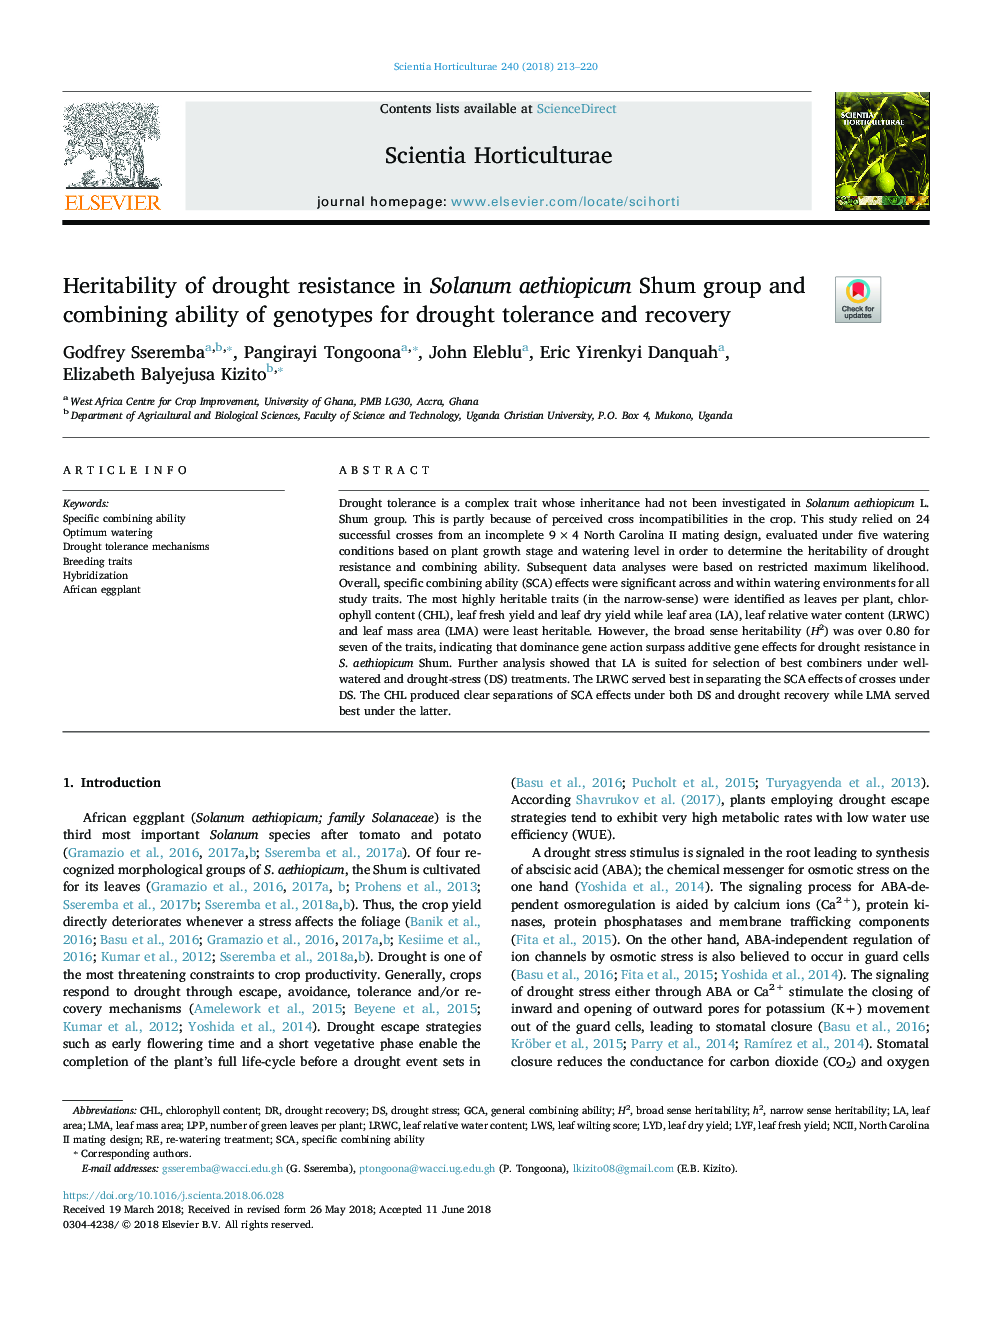 Heritability of drought resistance in Solanum aethiopicum Shum group and combining ability of genotypes for drought tolerance and recovery